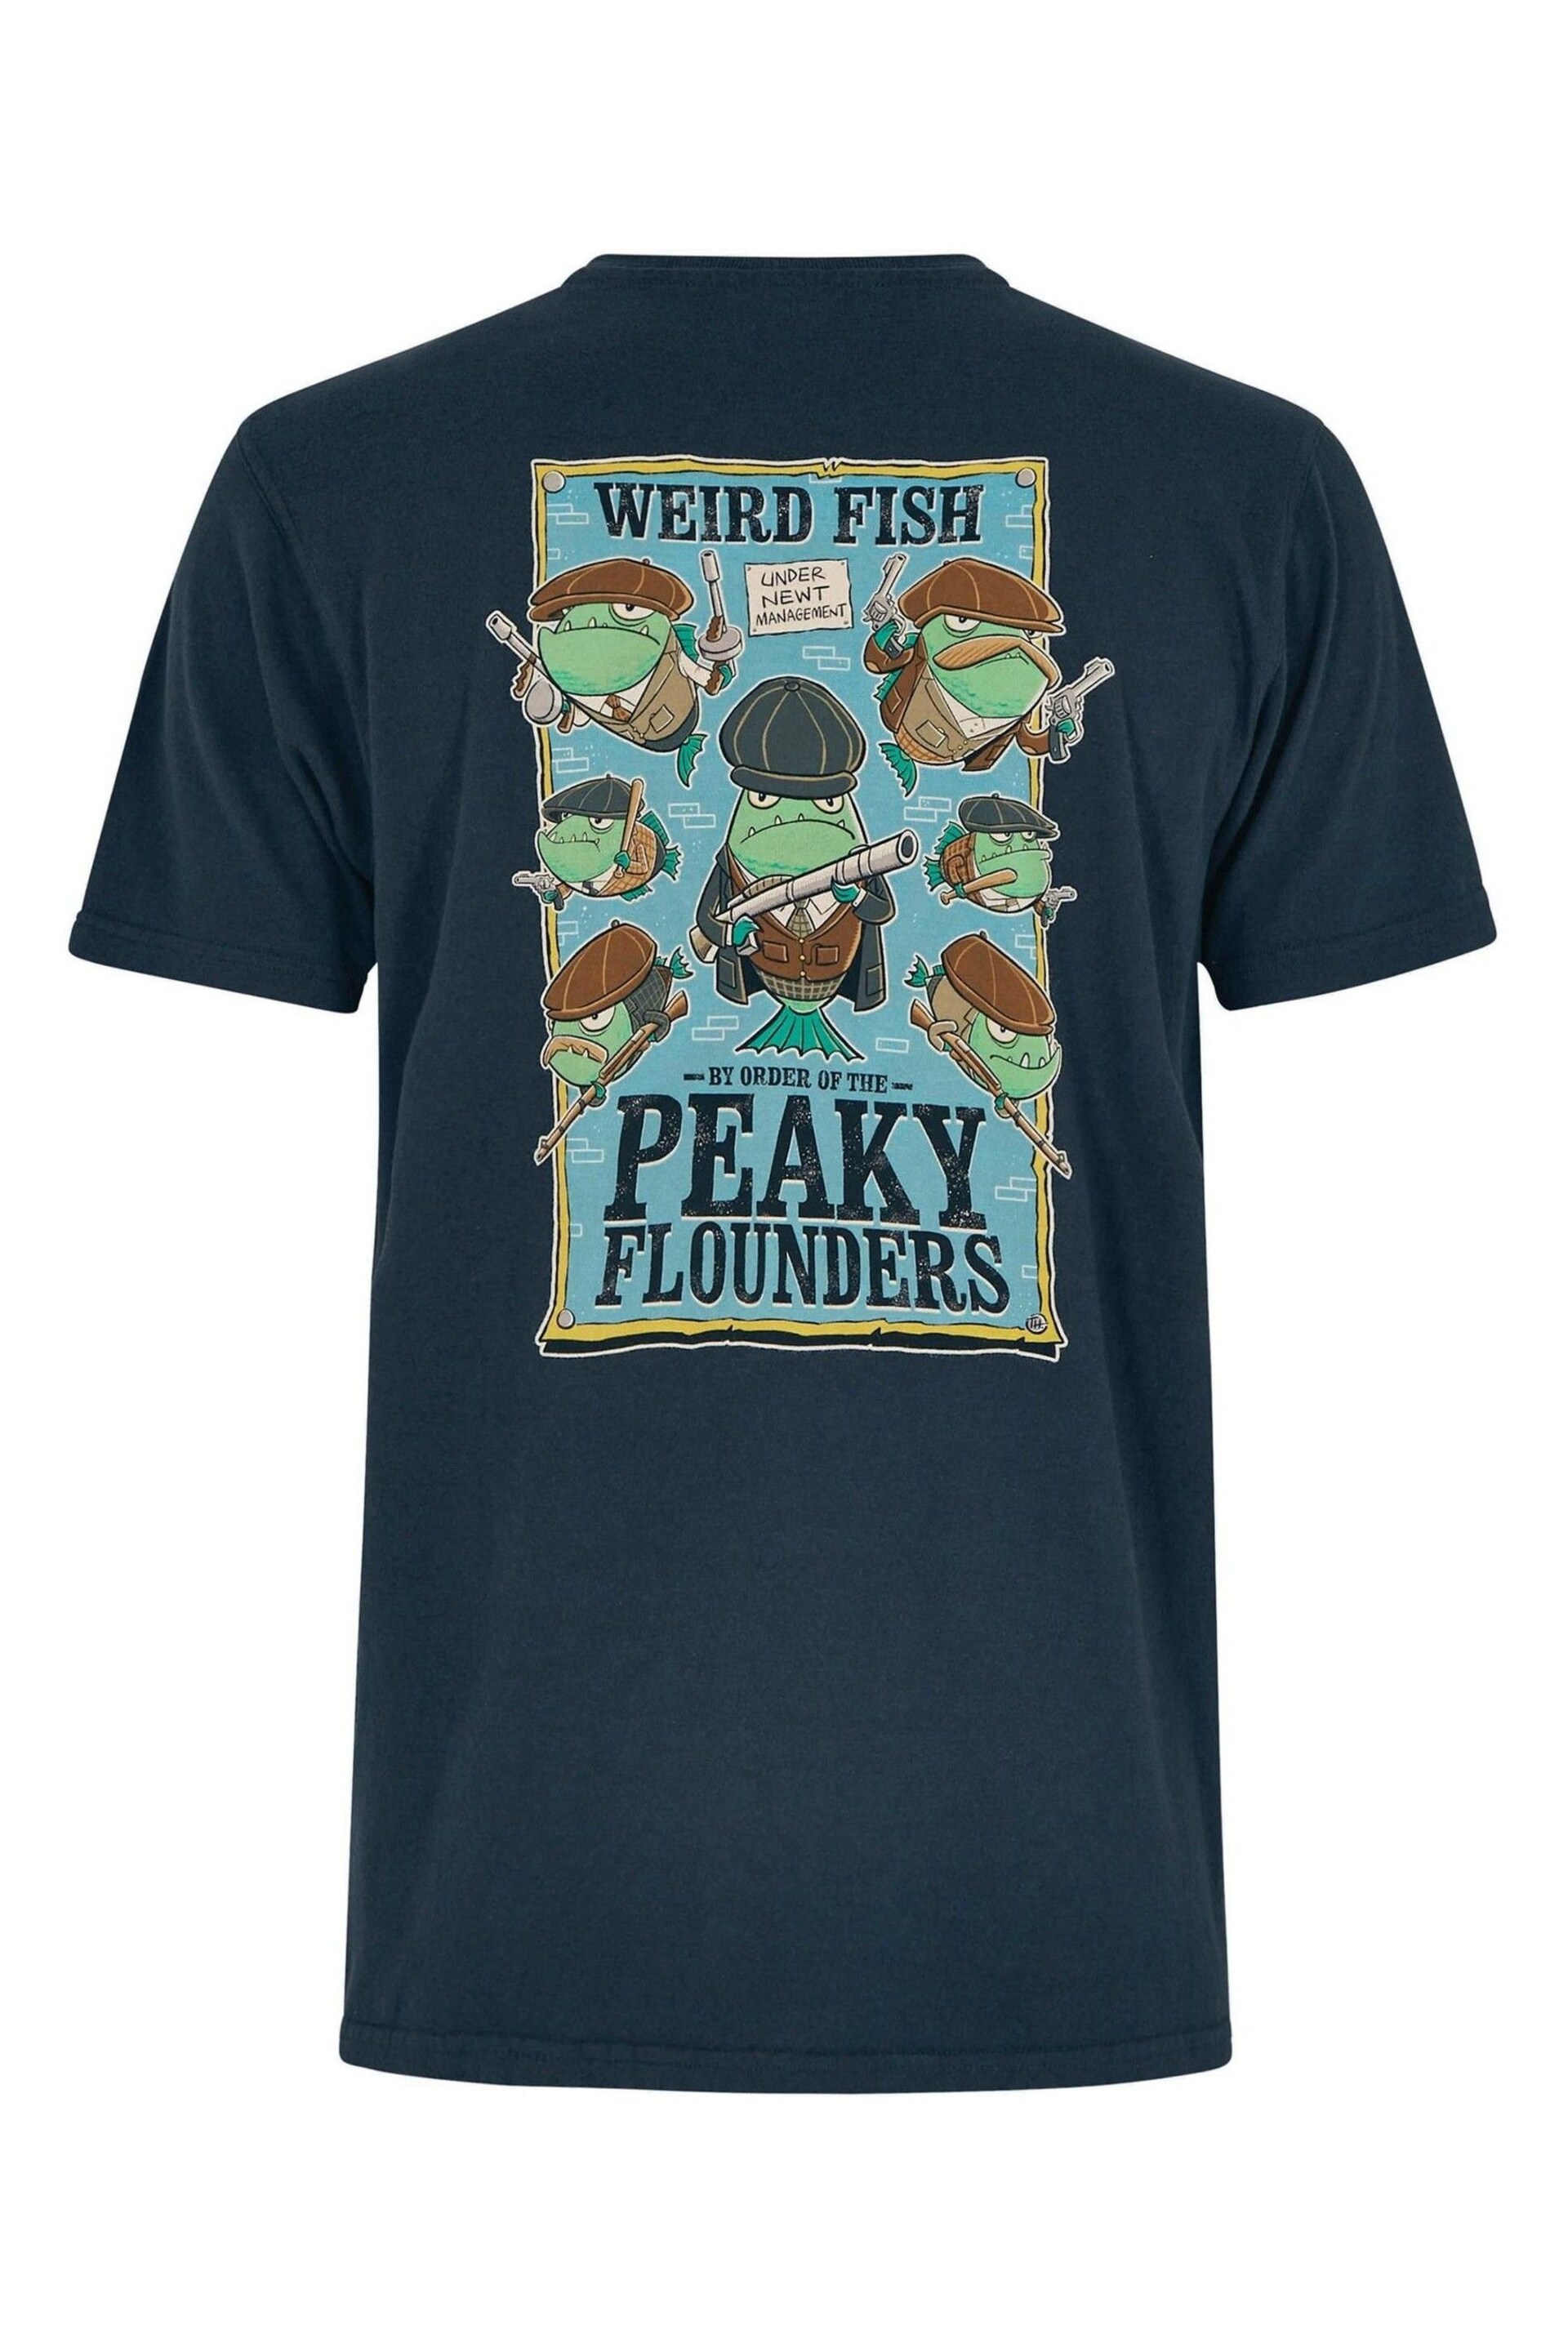 Weird Fish Blue Peaky Flounders Artist T-Shirt - Image 5 of 5